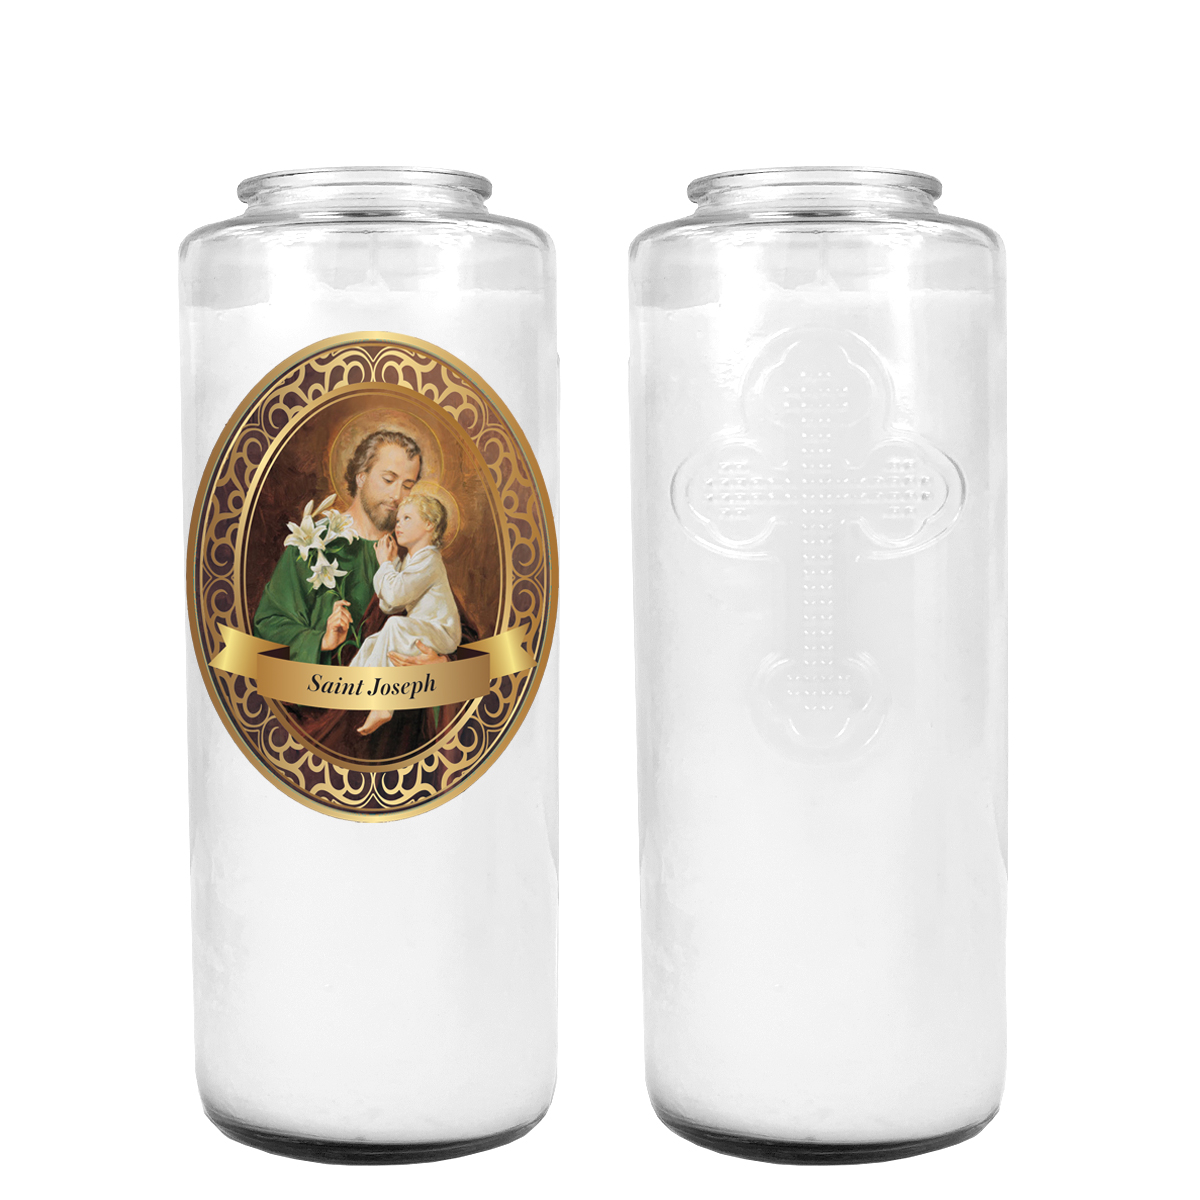 ST JOSEPH 5 DAY CANDLE W/ REMOVABLE LABEL